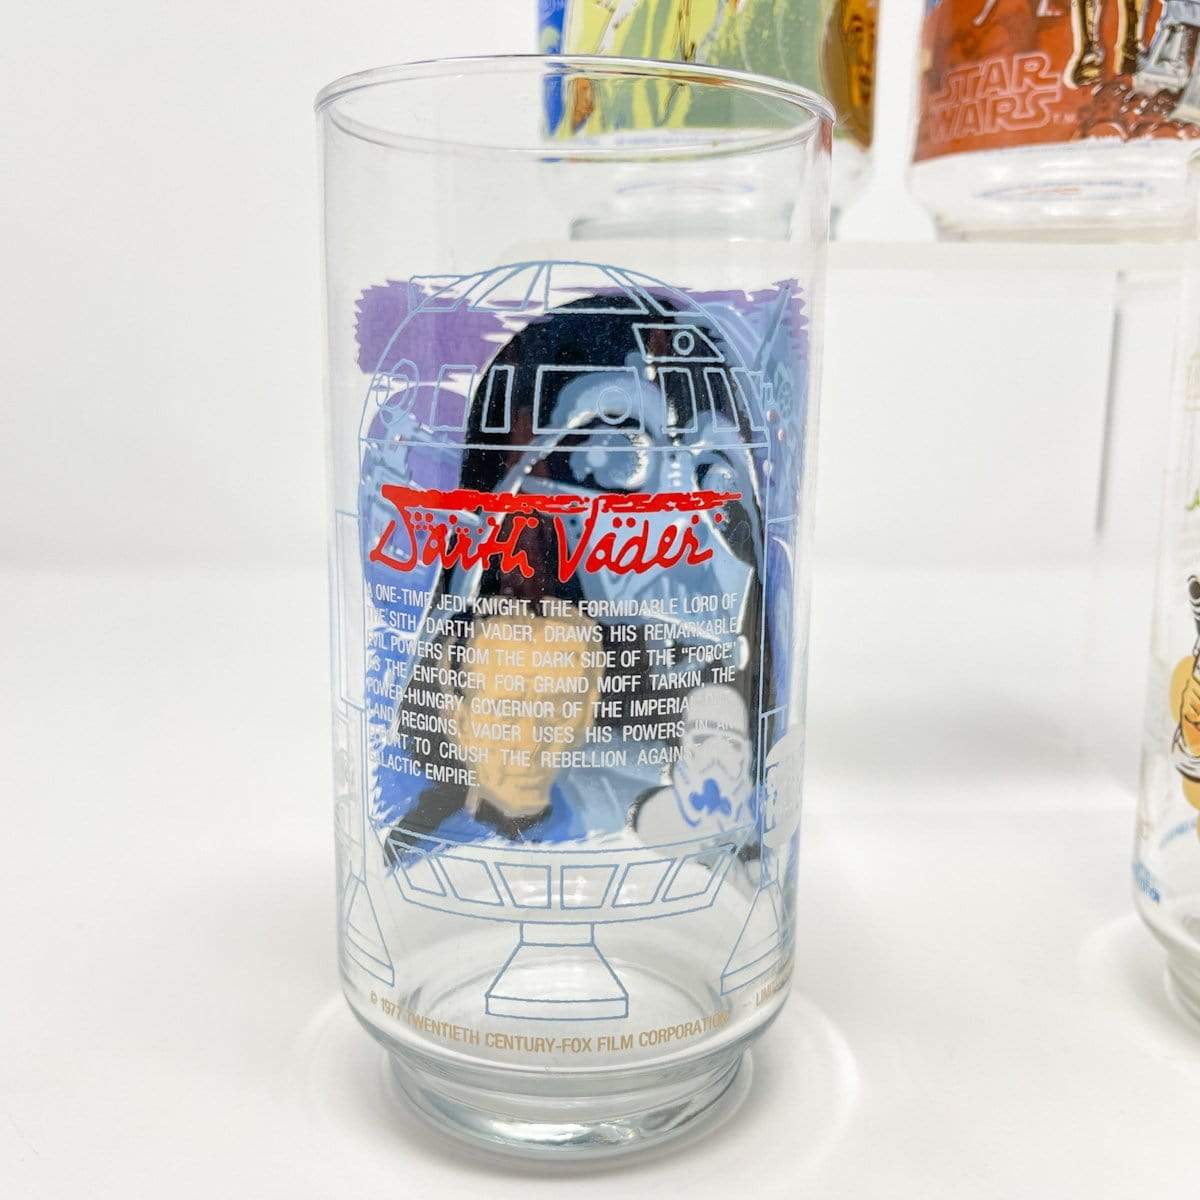 Vintage McDonald's Collectable Star Wars Glasses